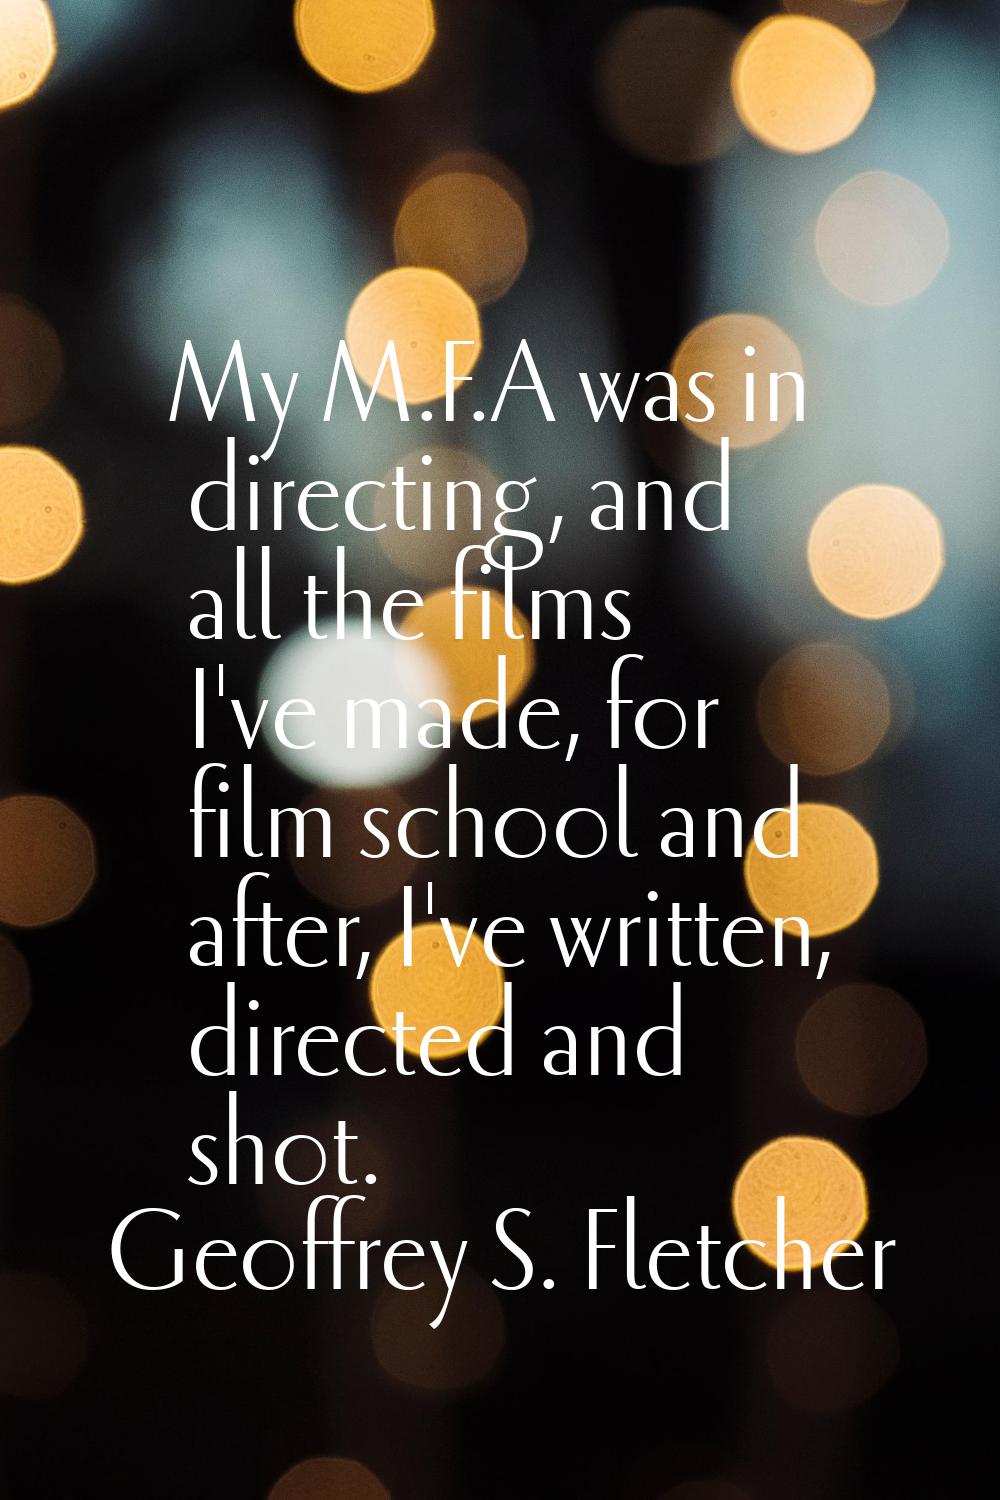 My M.F.A was in directing, and all the films I've made, for film school and after, I've written, di